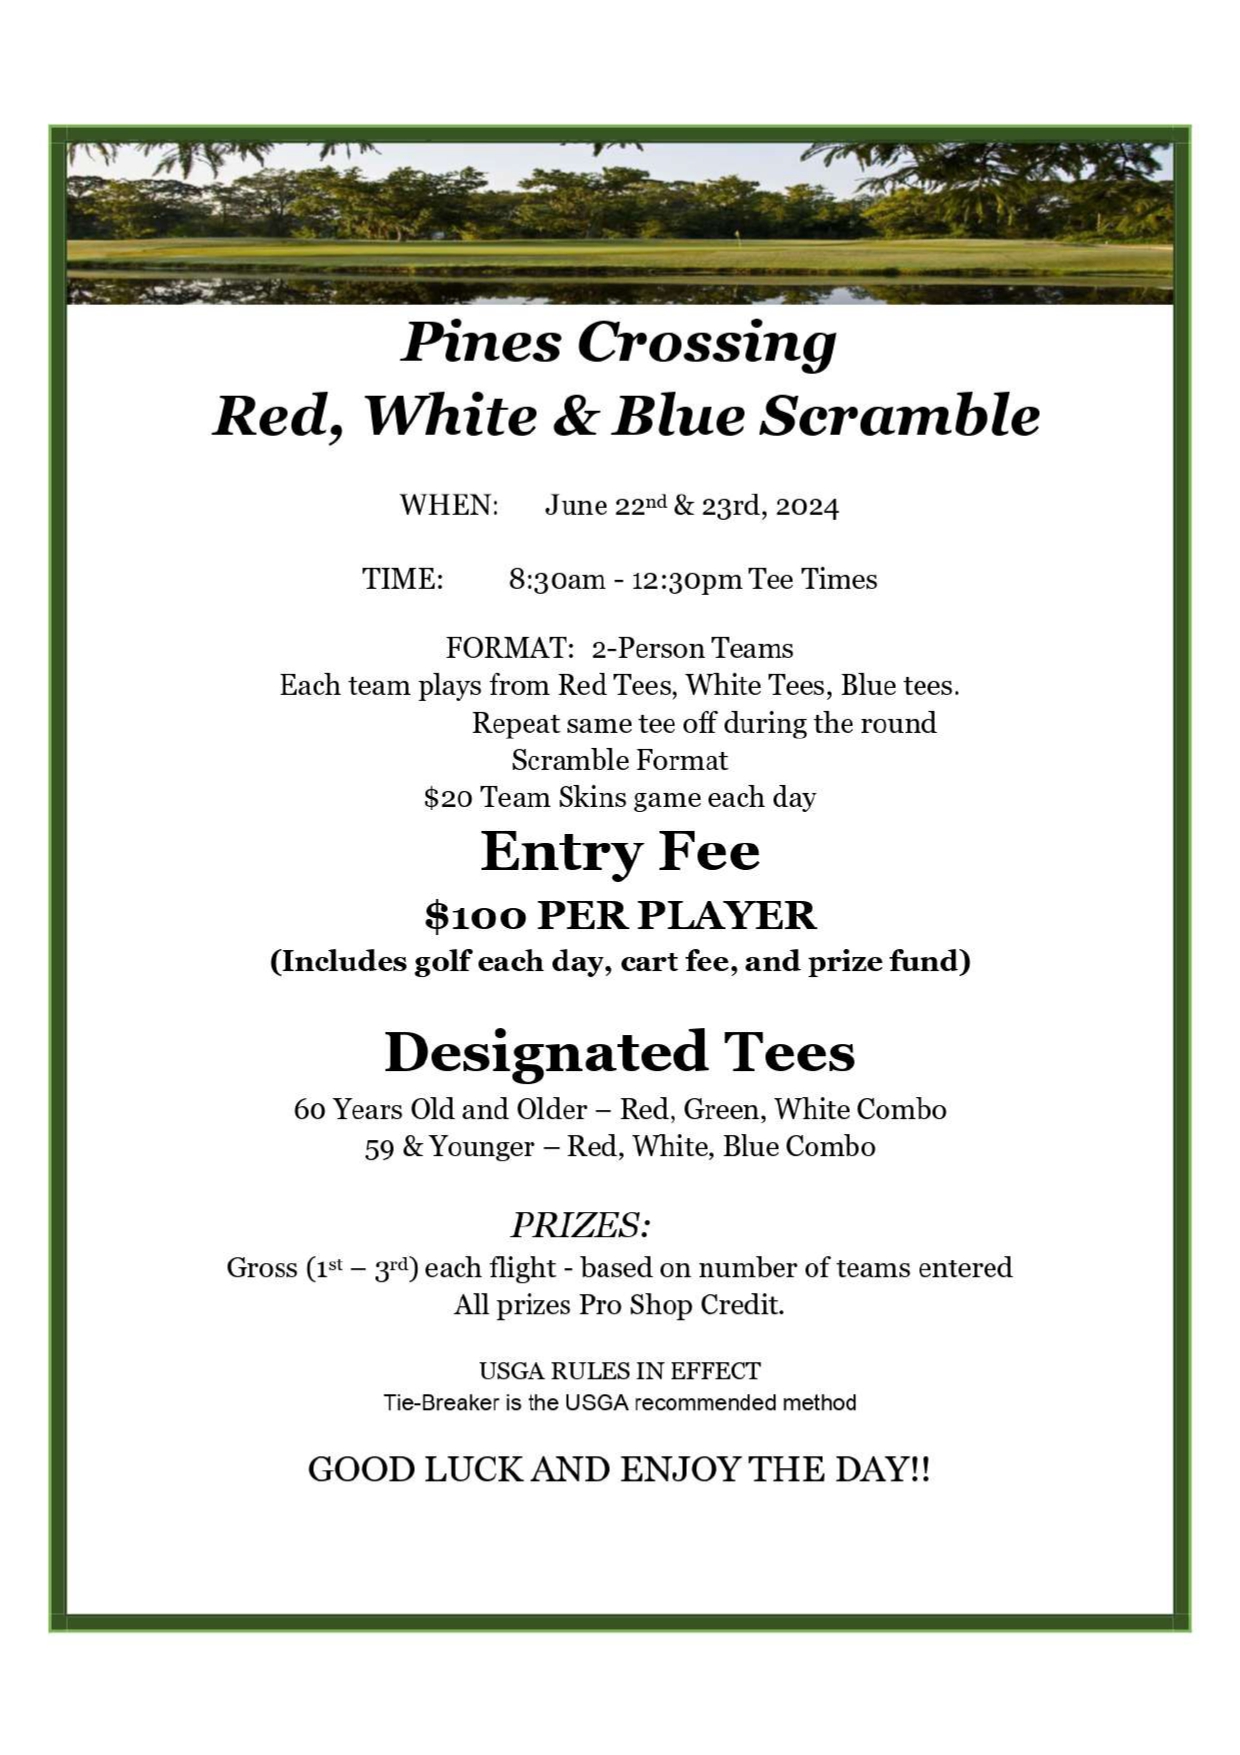 2024 Pines Crossing Red White Blue Scramble page 0001 page 0001